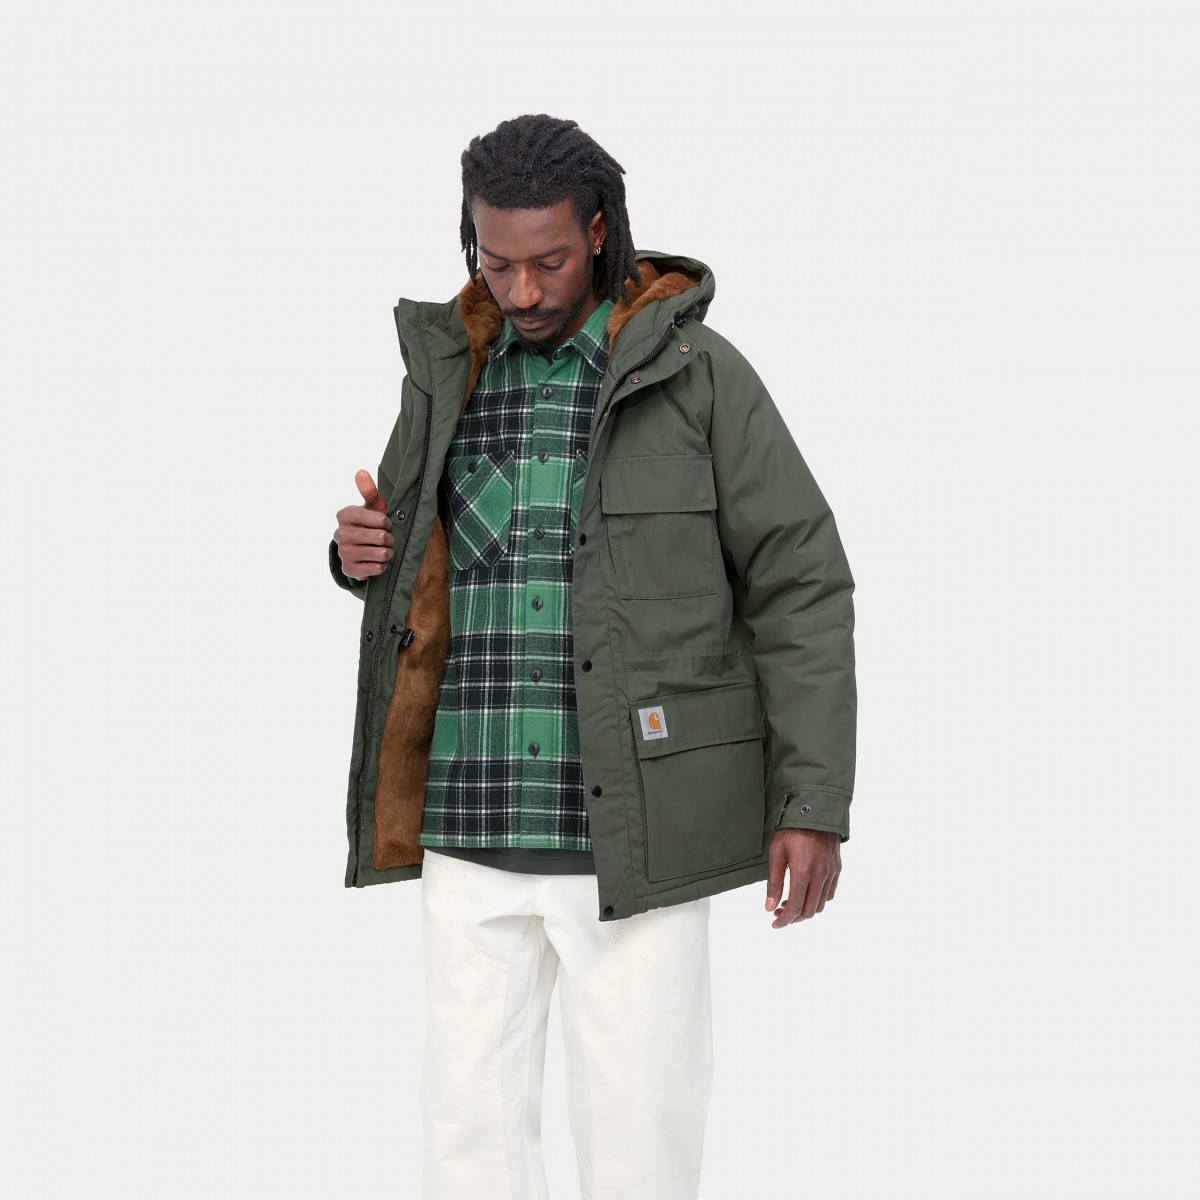 Manteau Carhartt Wip Homme : Nouvelle collection